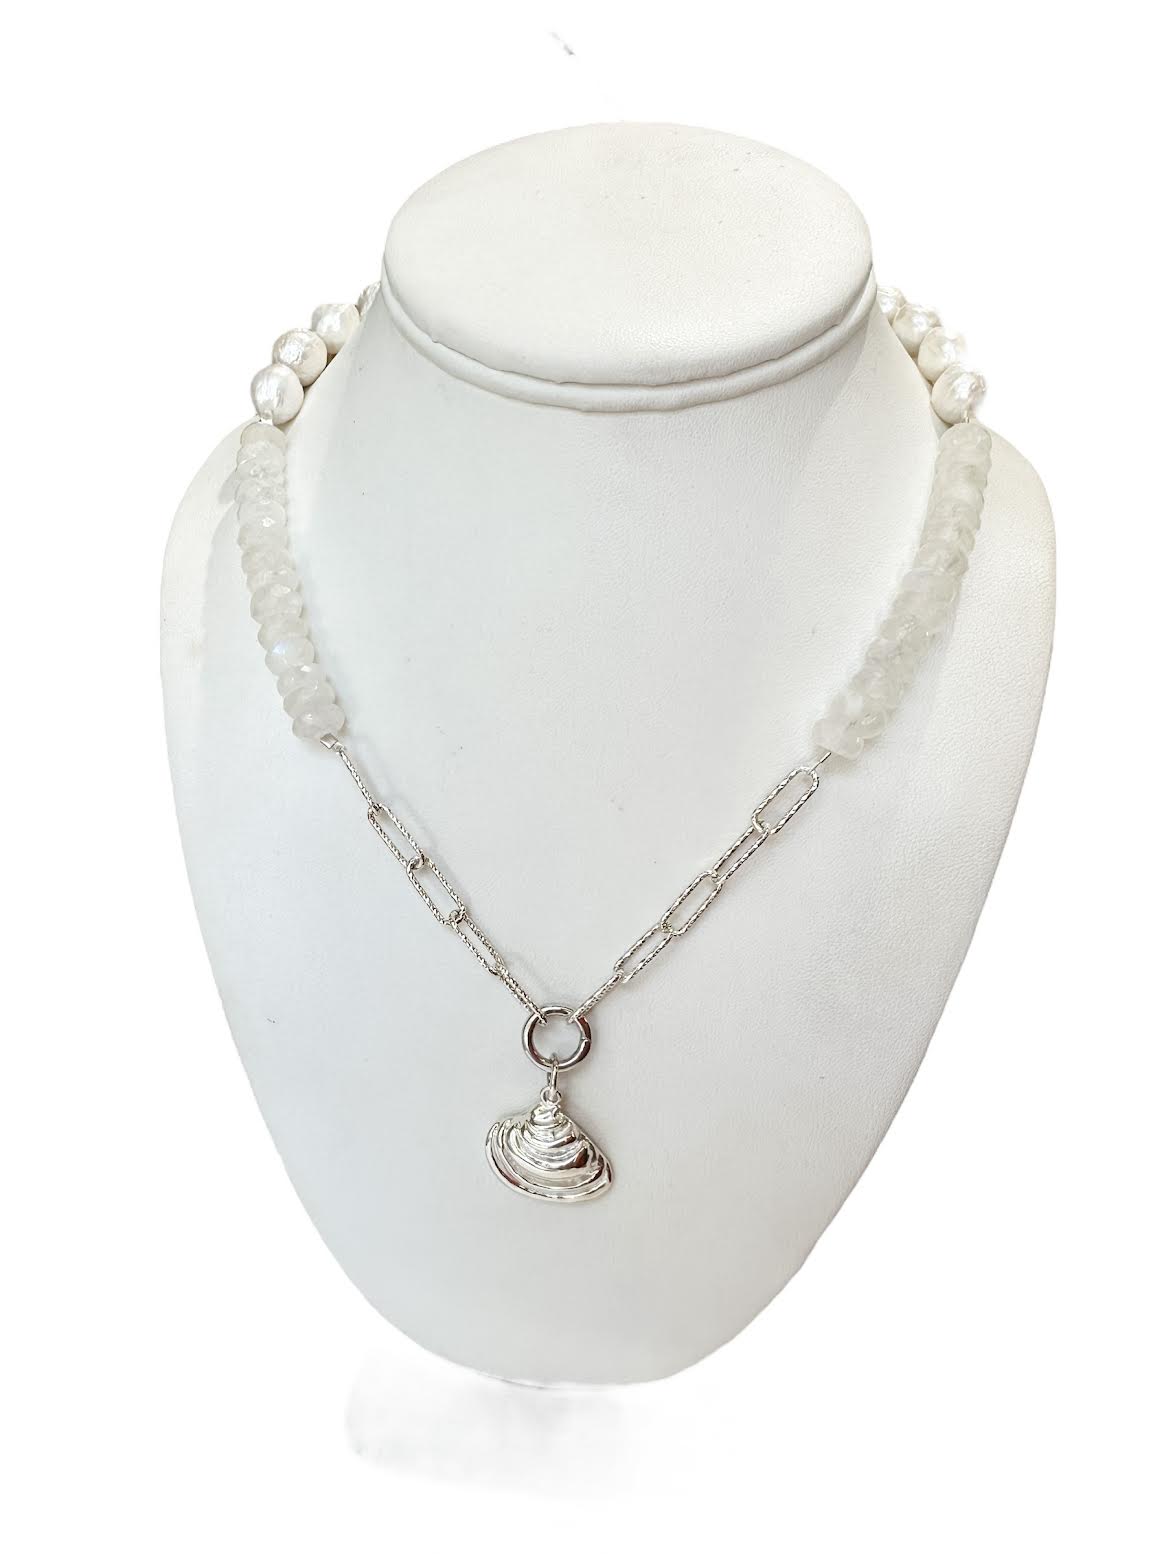 Pawleys Chapel - Sterling silver, Moonstone and Pearl Necklace